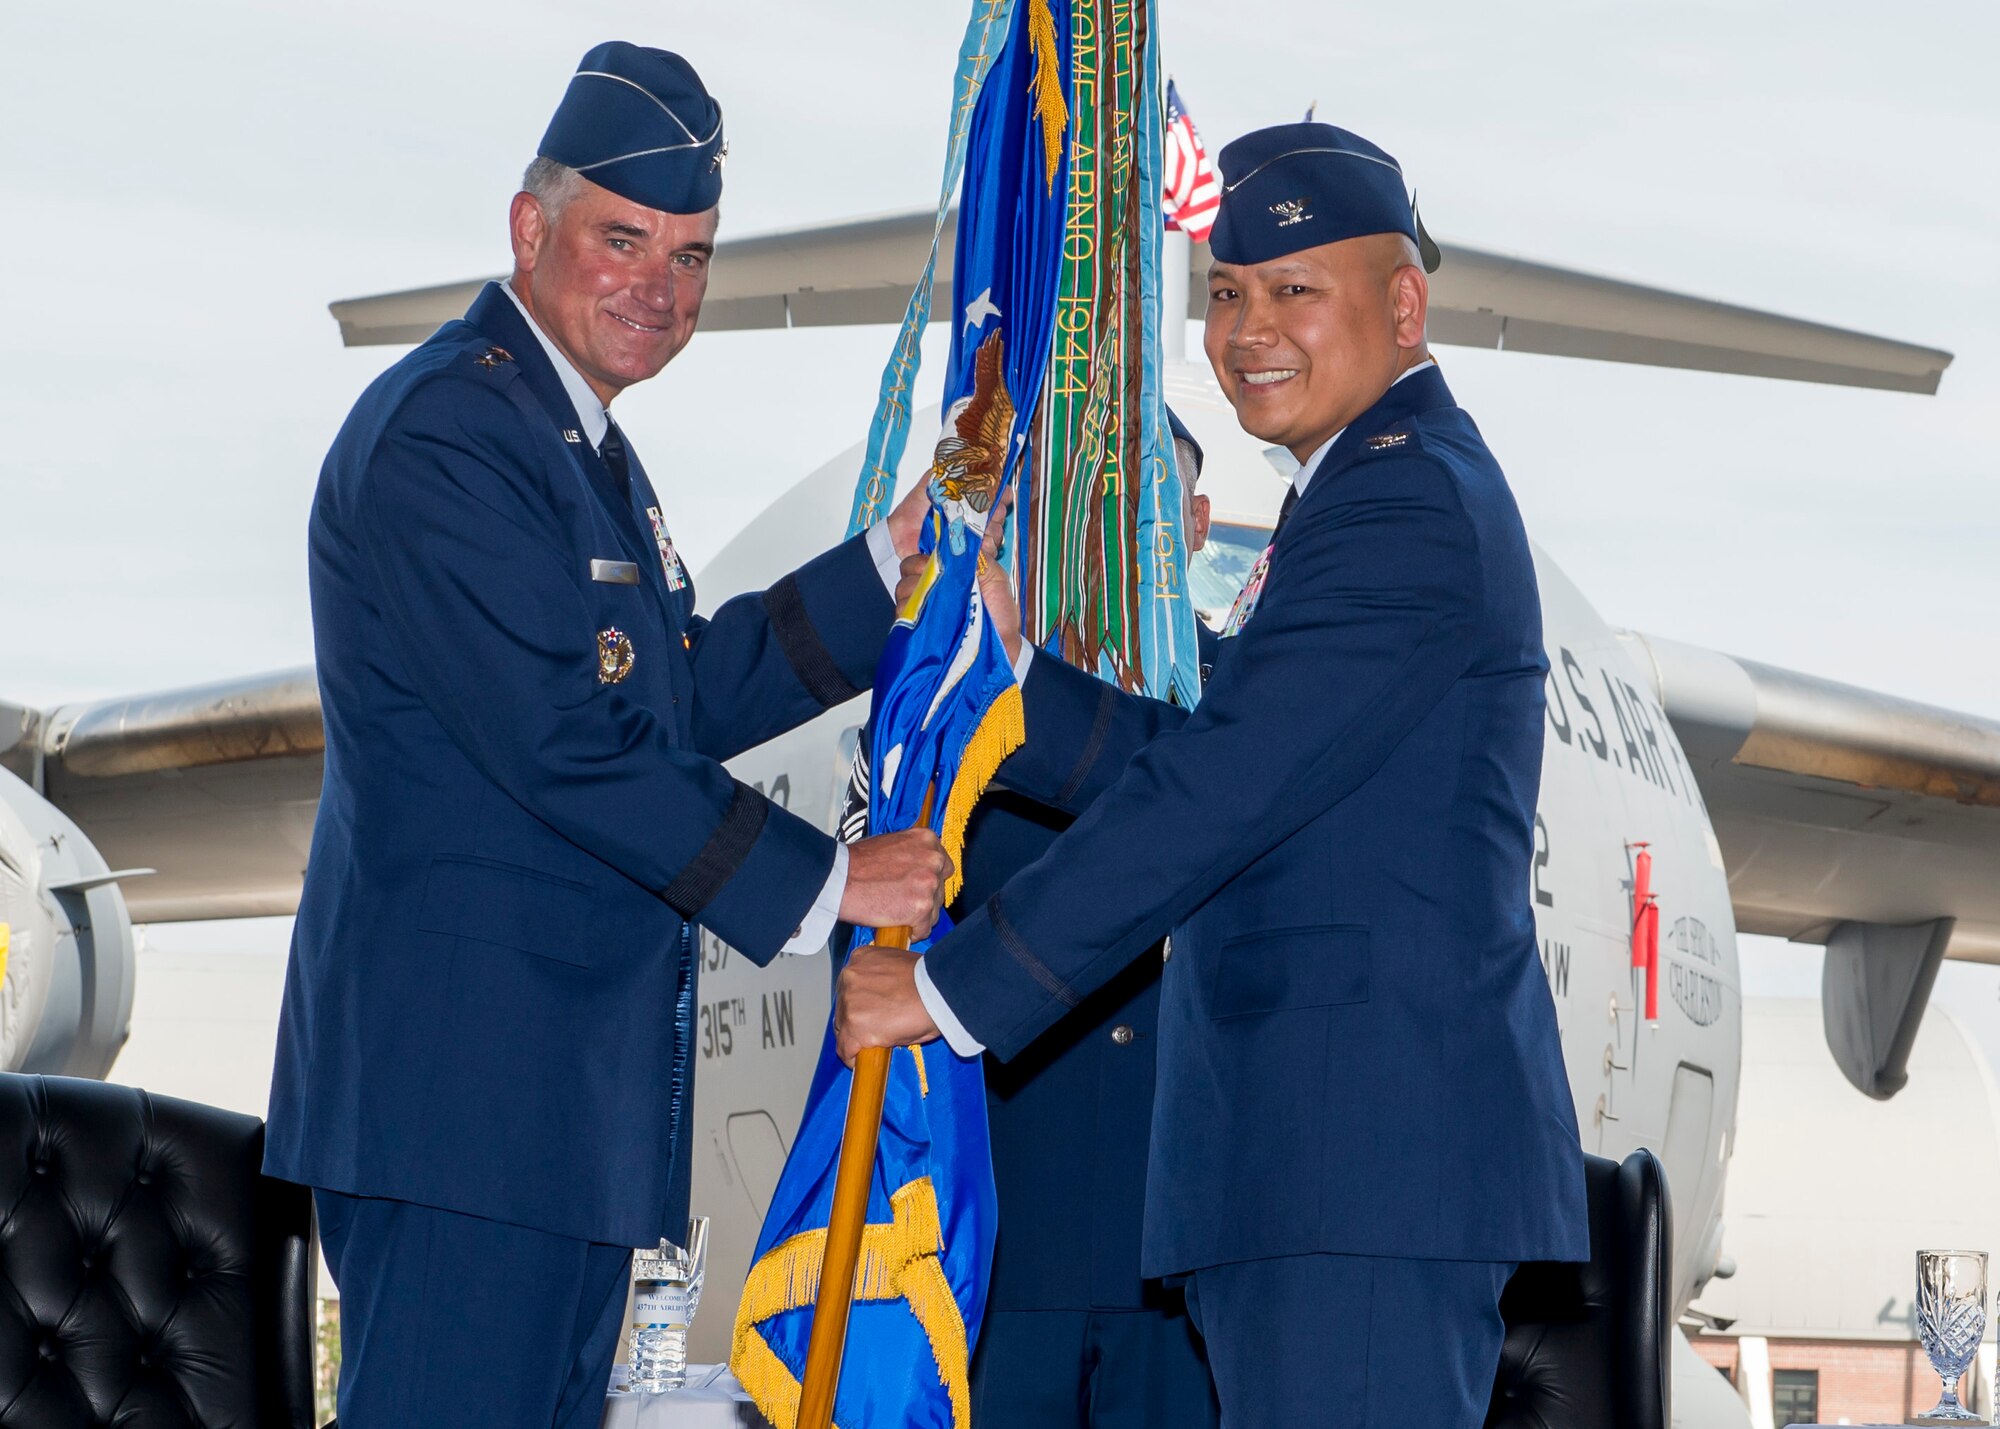 U.S. Air Force Colonel Jimmy Canlas (right) accepts the 437th Airlift Wing guidon from U.S. Air Force Lt. Gen. Samuel D. Cox, 18th Air Force commander, during the 437th AW change of command ceremony June 24, 2016 here. Now serving as the 437th Airlift Wing commander, Canlas attended the first ever Asian American and Pacific Islander forum sponsored by Presidential Commission in Washington, D.C., Dec. 5, 2016. After his father retired from the Navy, Canlas and his family moved to the Philippines from Southern California when he was eight years old. Later, Canlas returned to the U.S. to enroll in the Air Force ROTC program at the University of Texas in San Antonio, TX. (U.S. Air Force photo/Staff Sgt. Jared Trimarchi)